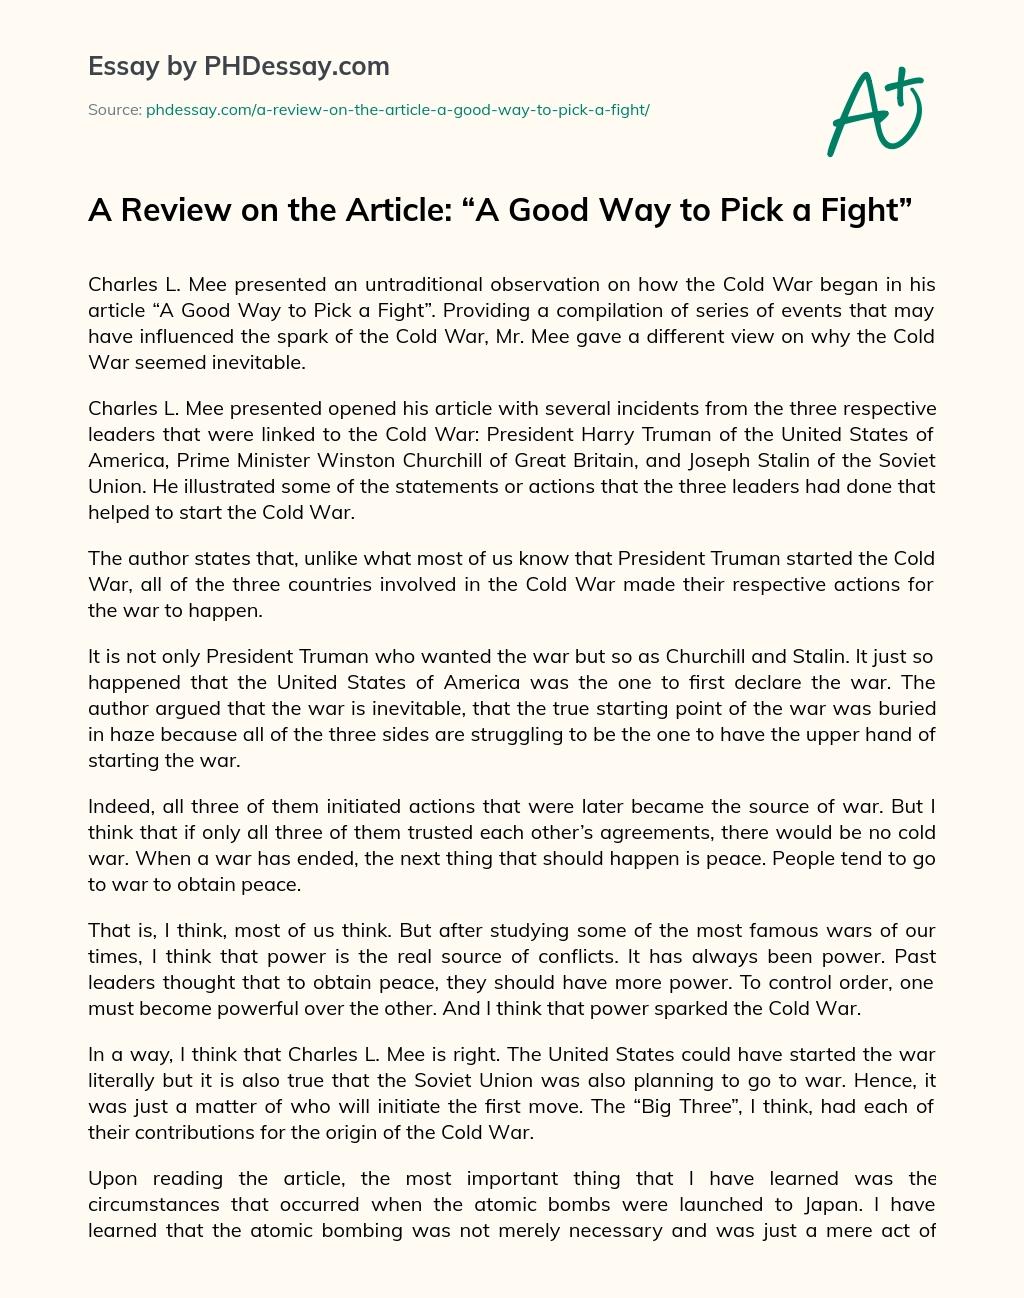 A Review on the Article: “A Good Way to Pick a Fight” essay